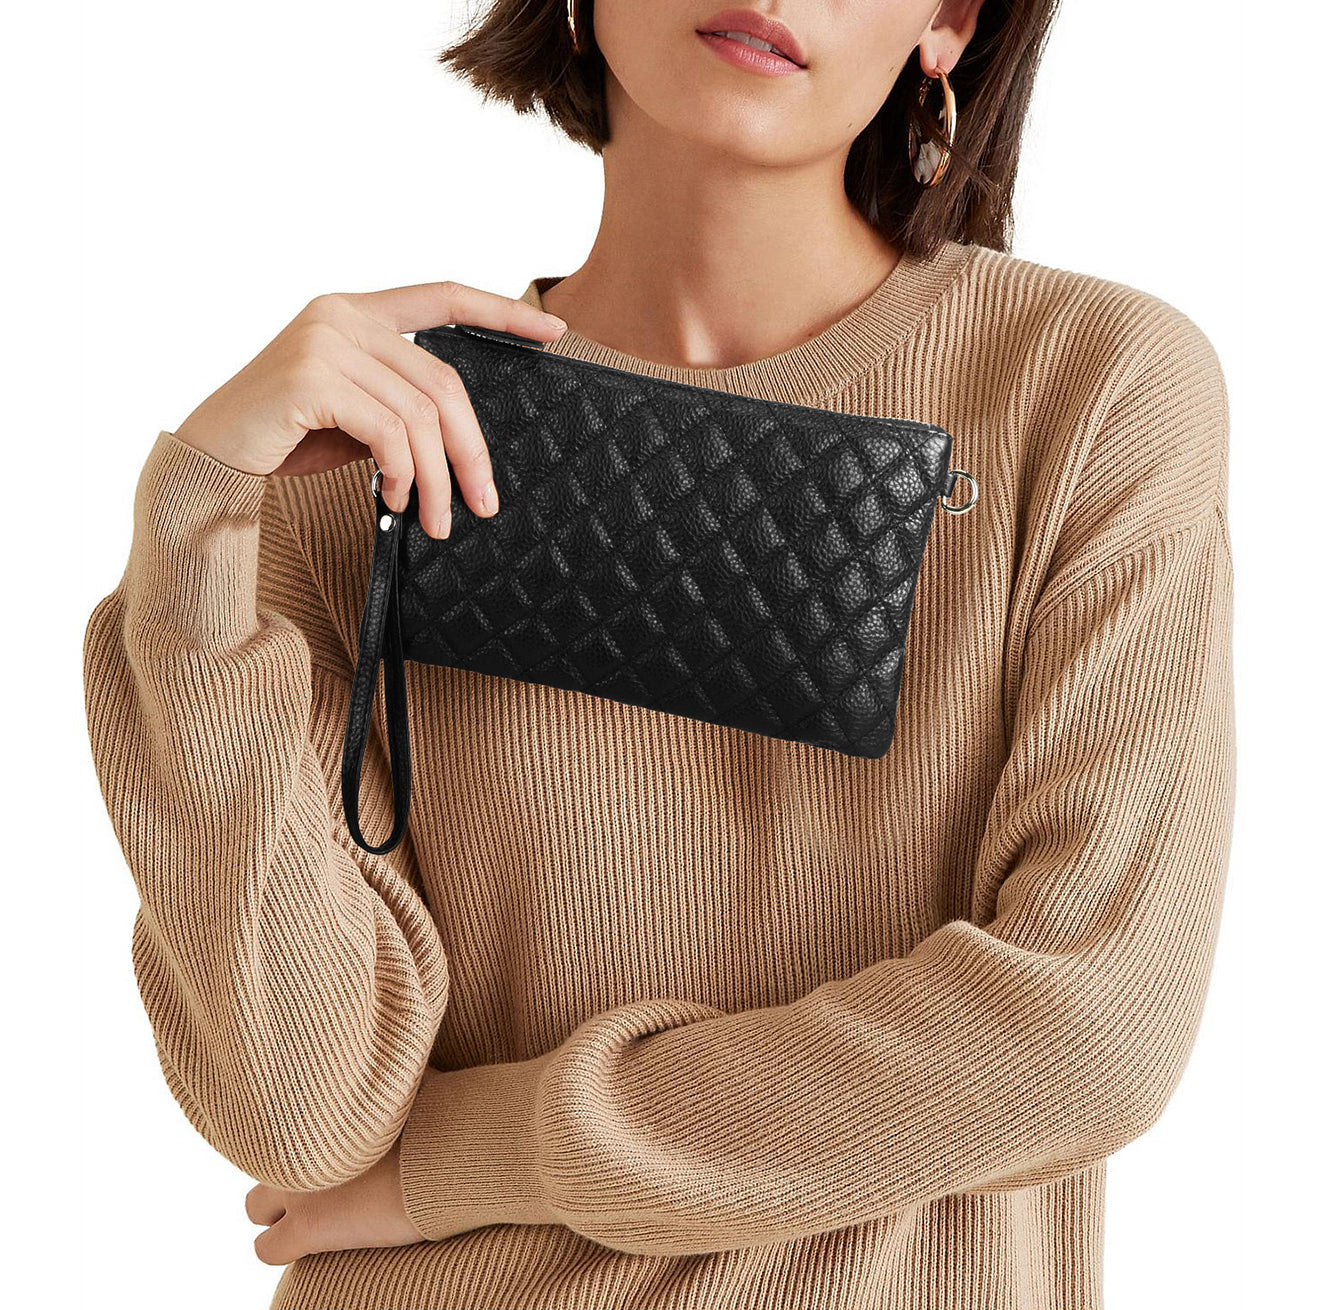 Quilted black leather clutch bag